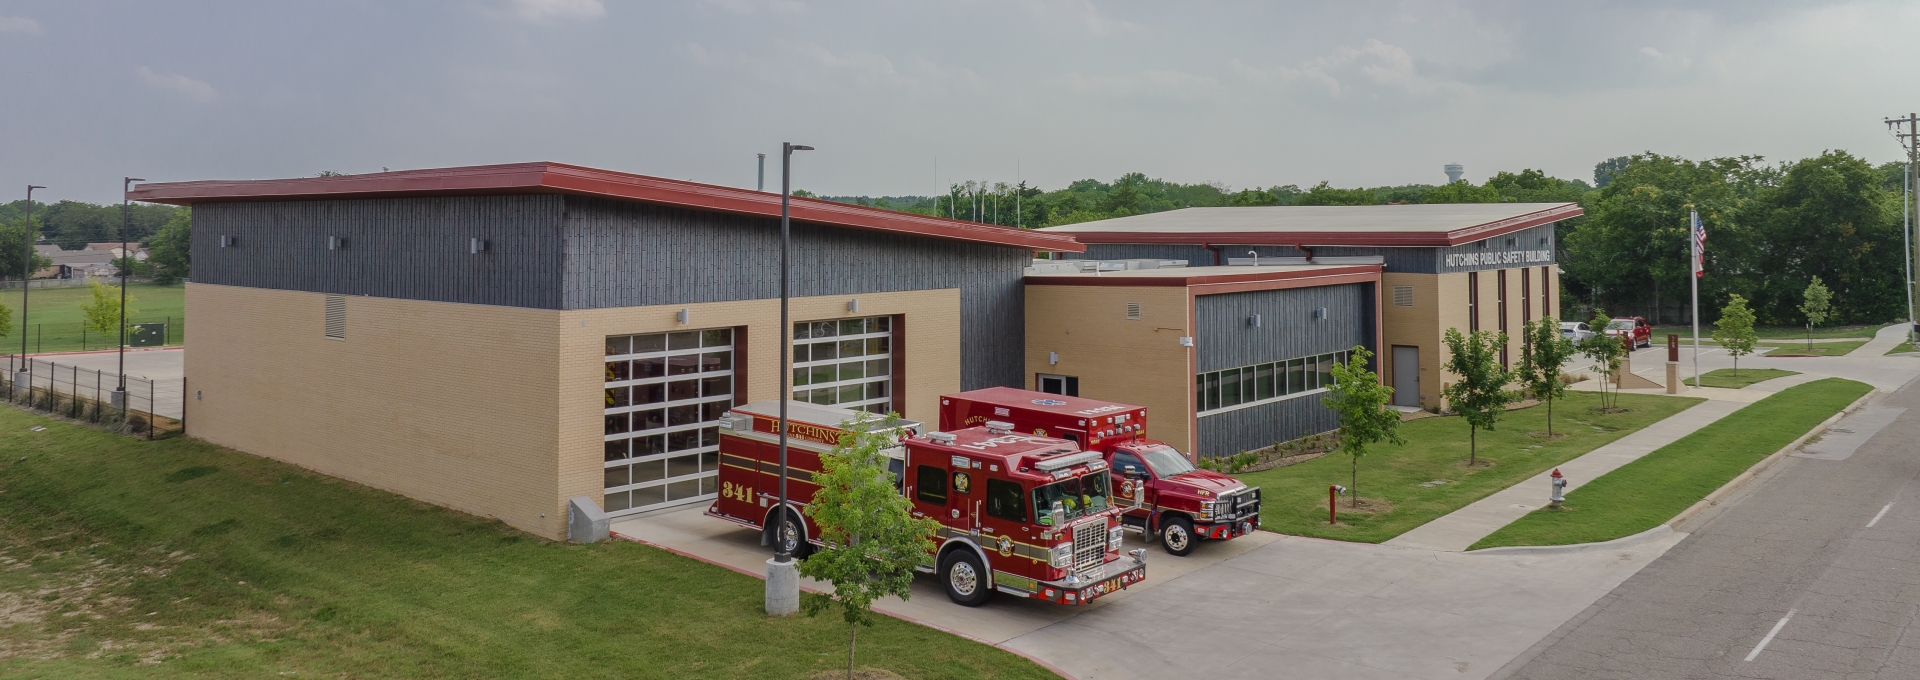 Photo of the Public Safety Building with a fire truck and ambulance in front